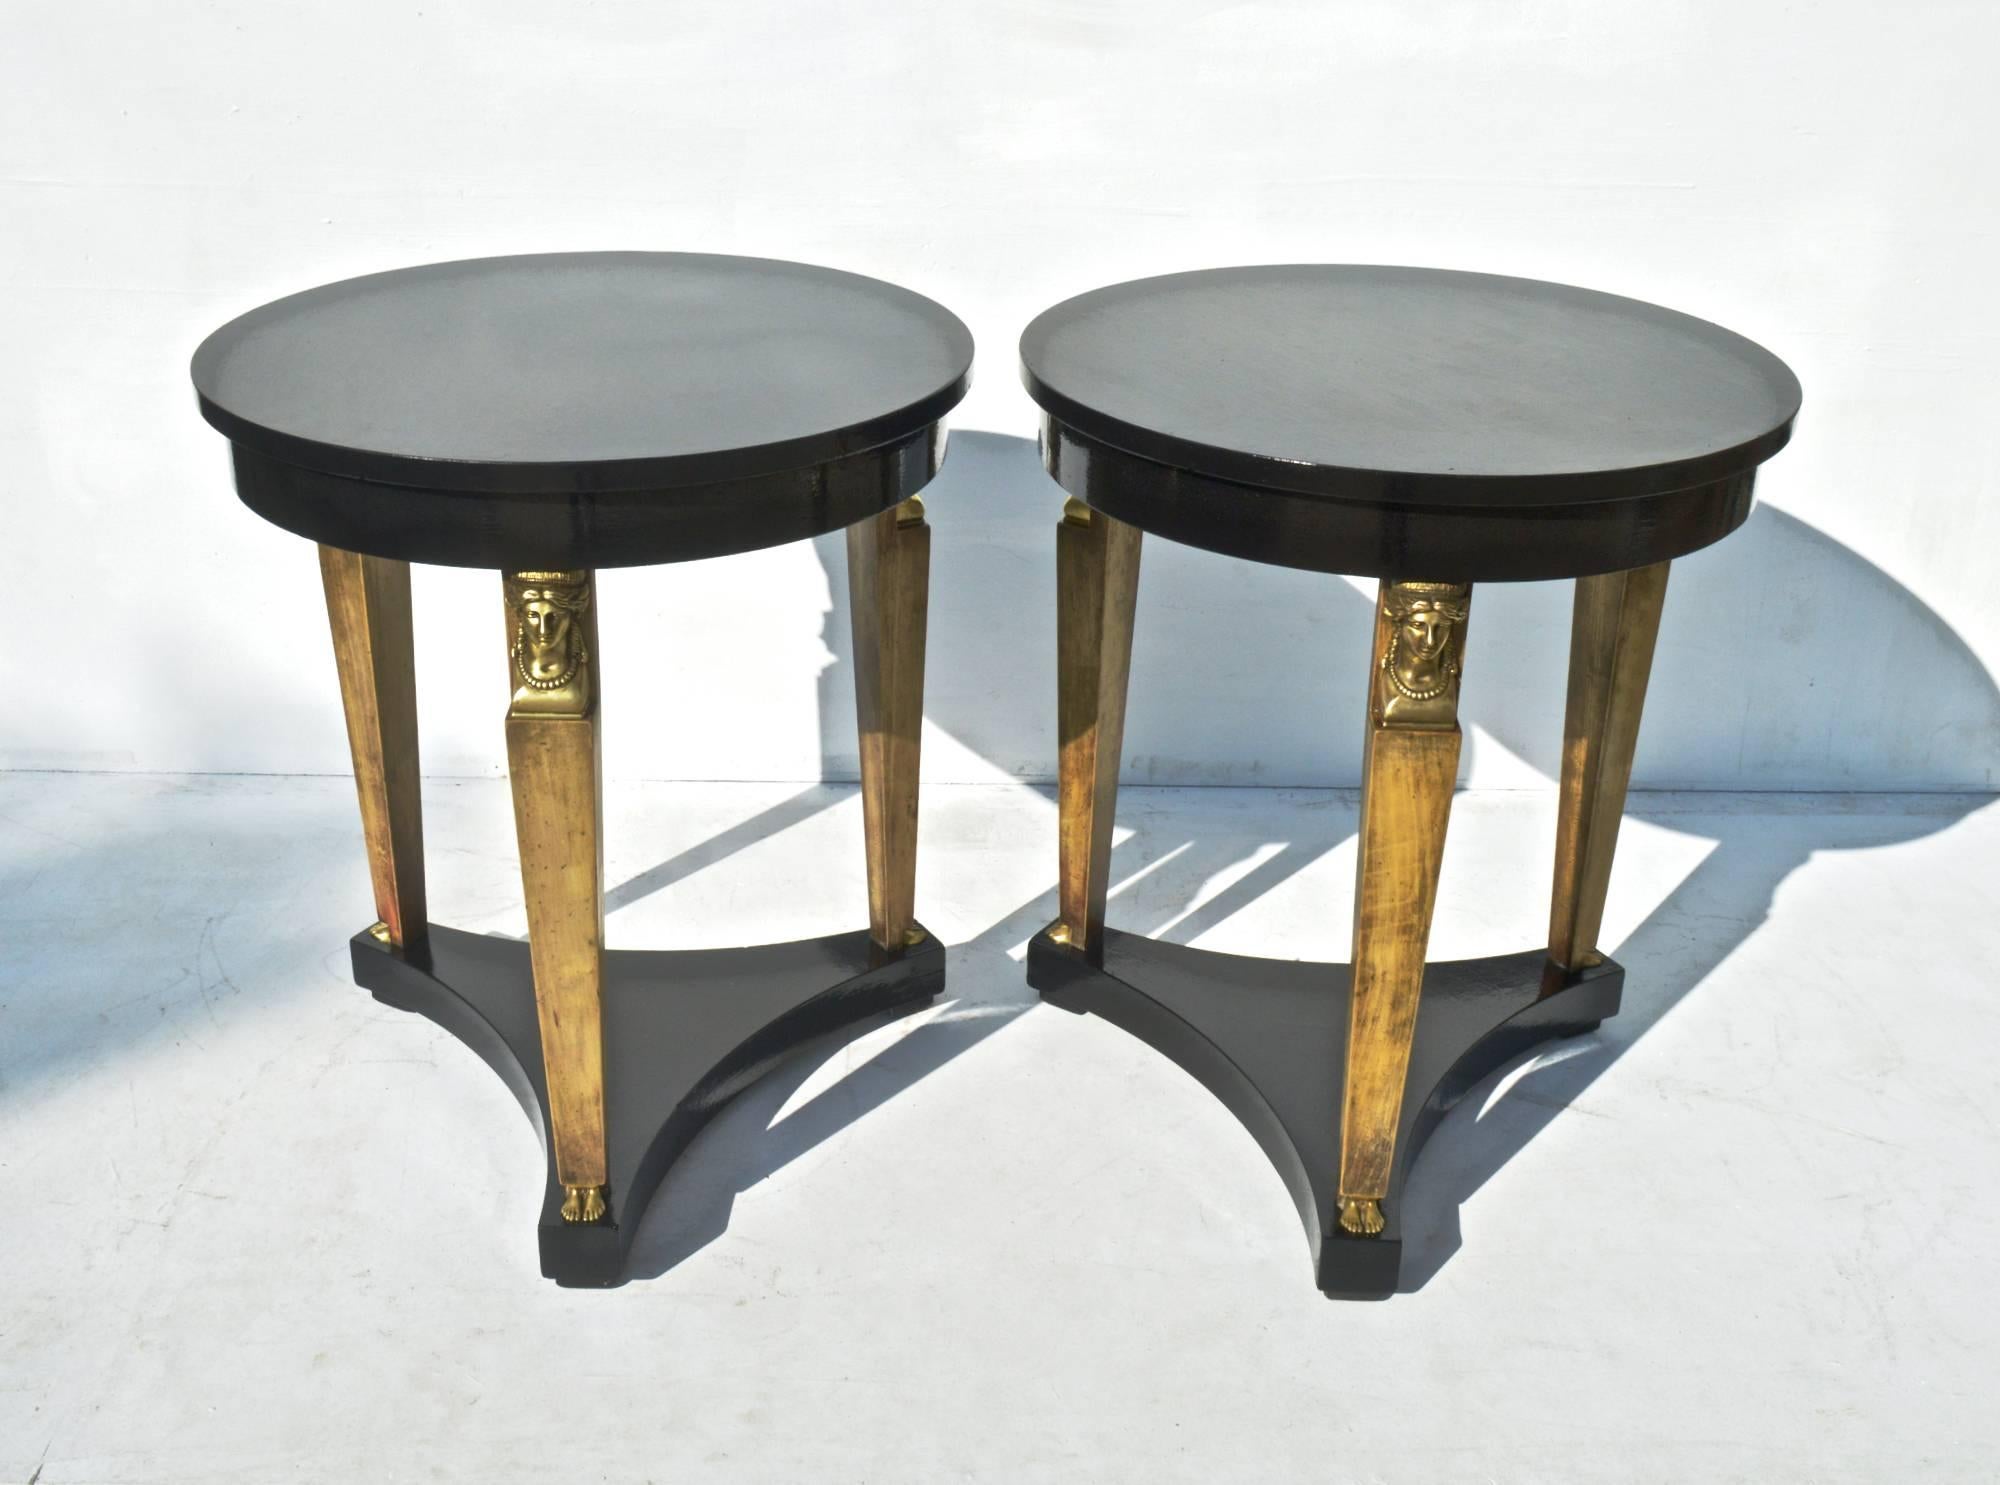 Pair of striking Neoclassical Revival end tables by Baker Furniture, circa 1980, the tables shimmer in a recently applied black lacquer by Fine Paints of Europe. On each table, a gently tapering leg is beautifully accented by bronze 